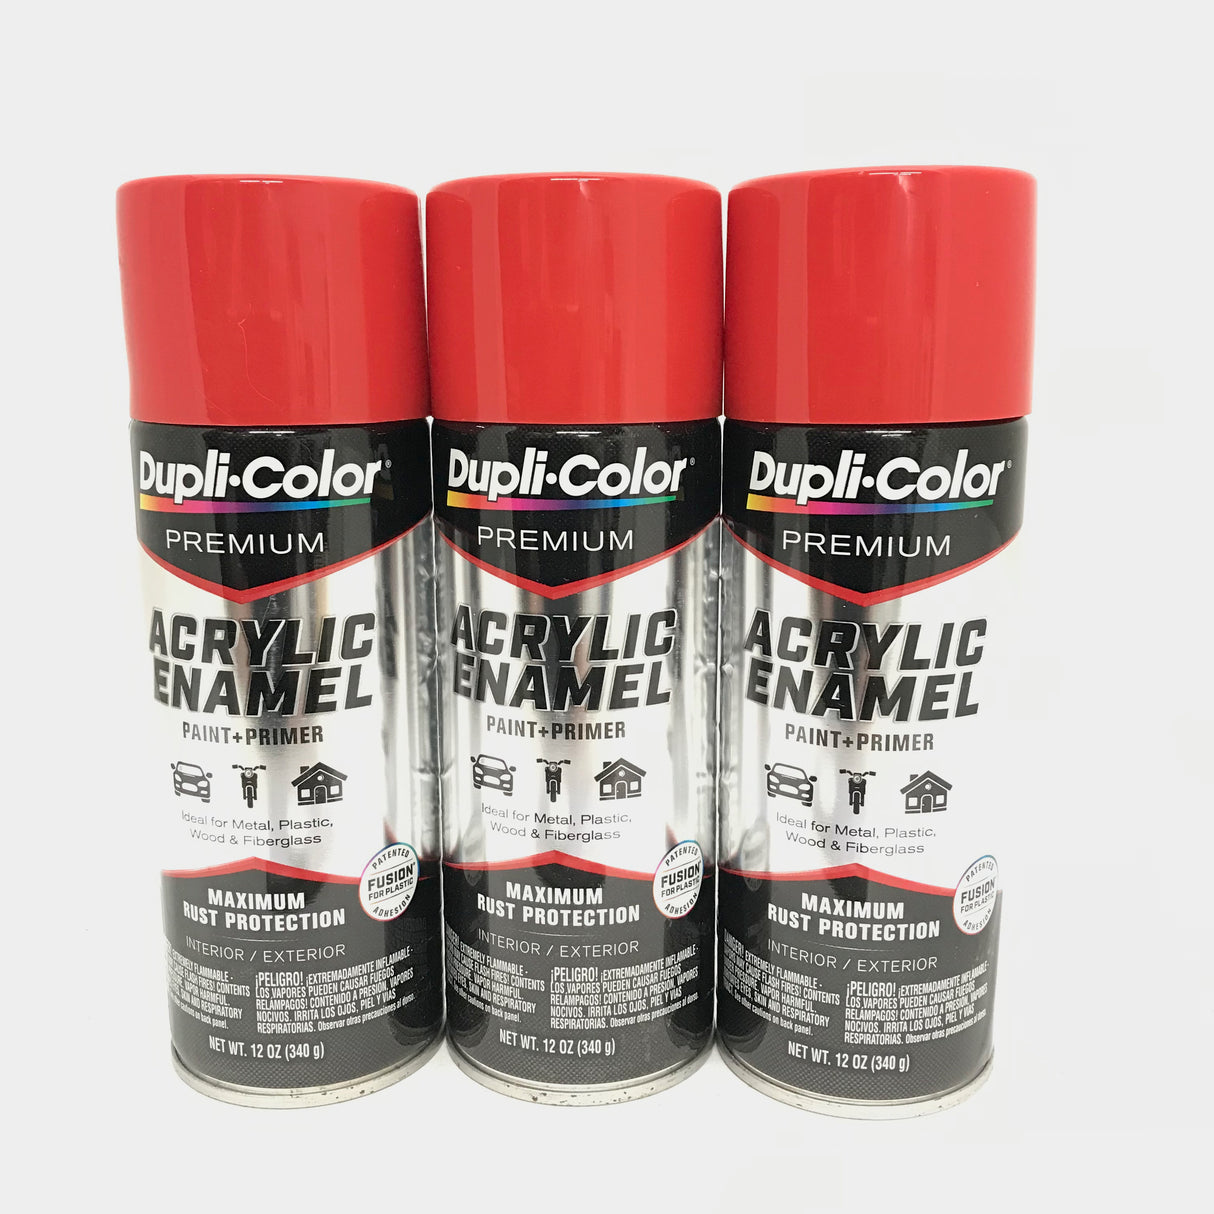 Duplicolor PAE107-3 PACK CHERRY RED Premium Acrylic Enamel - Max Rust Protection - 12 OZ